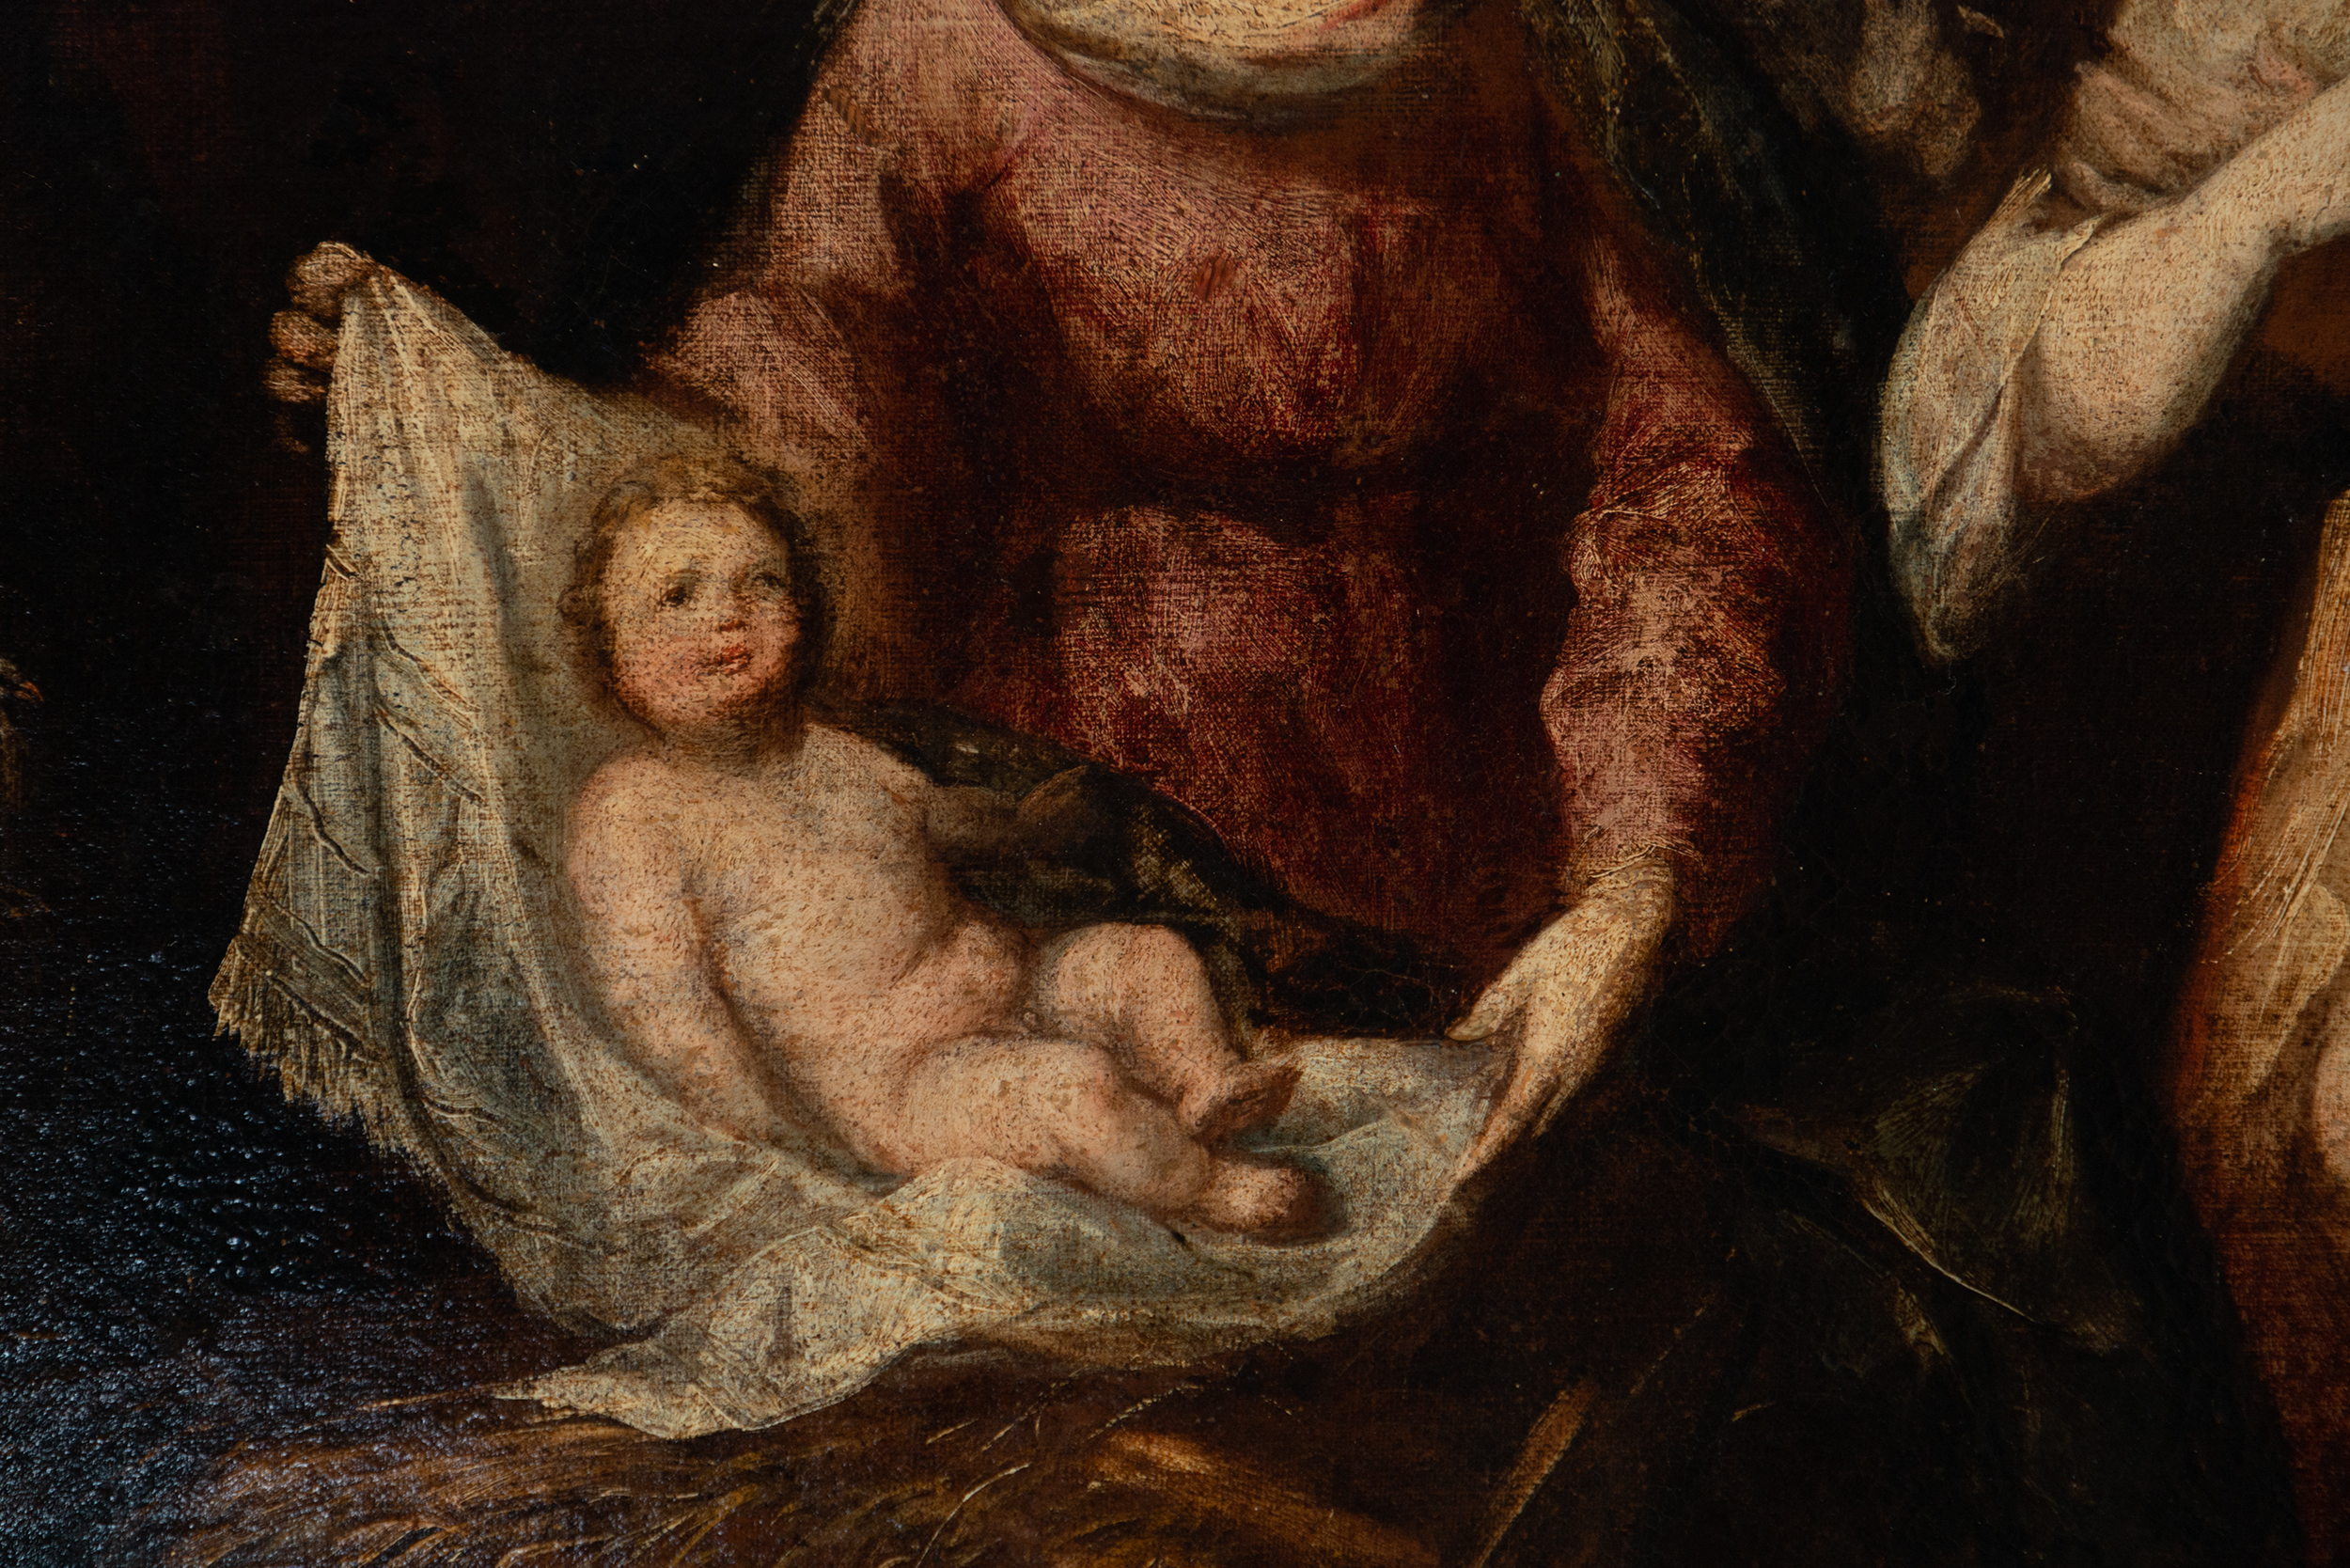 Adoration of the Shepherds, Italian school of the 17th century - Image 6 of 9